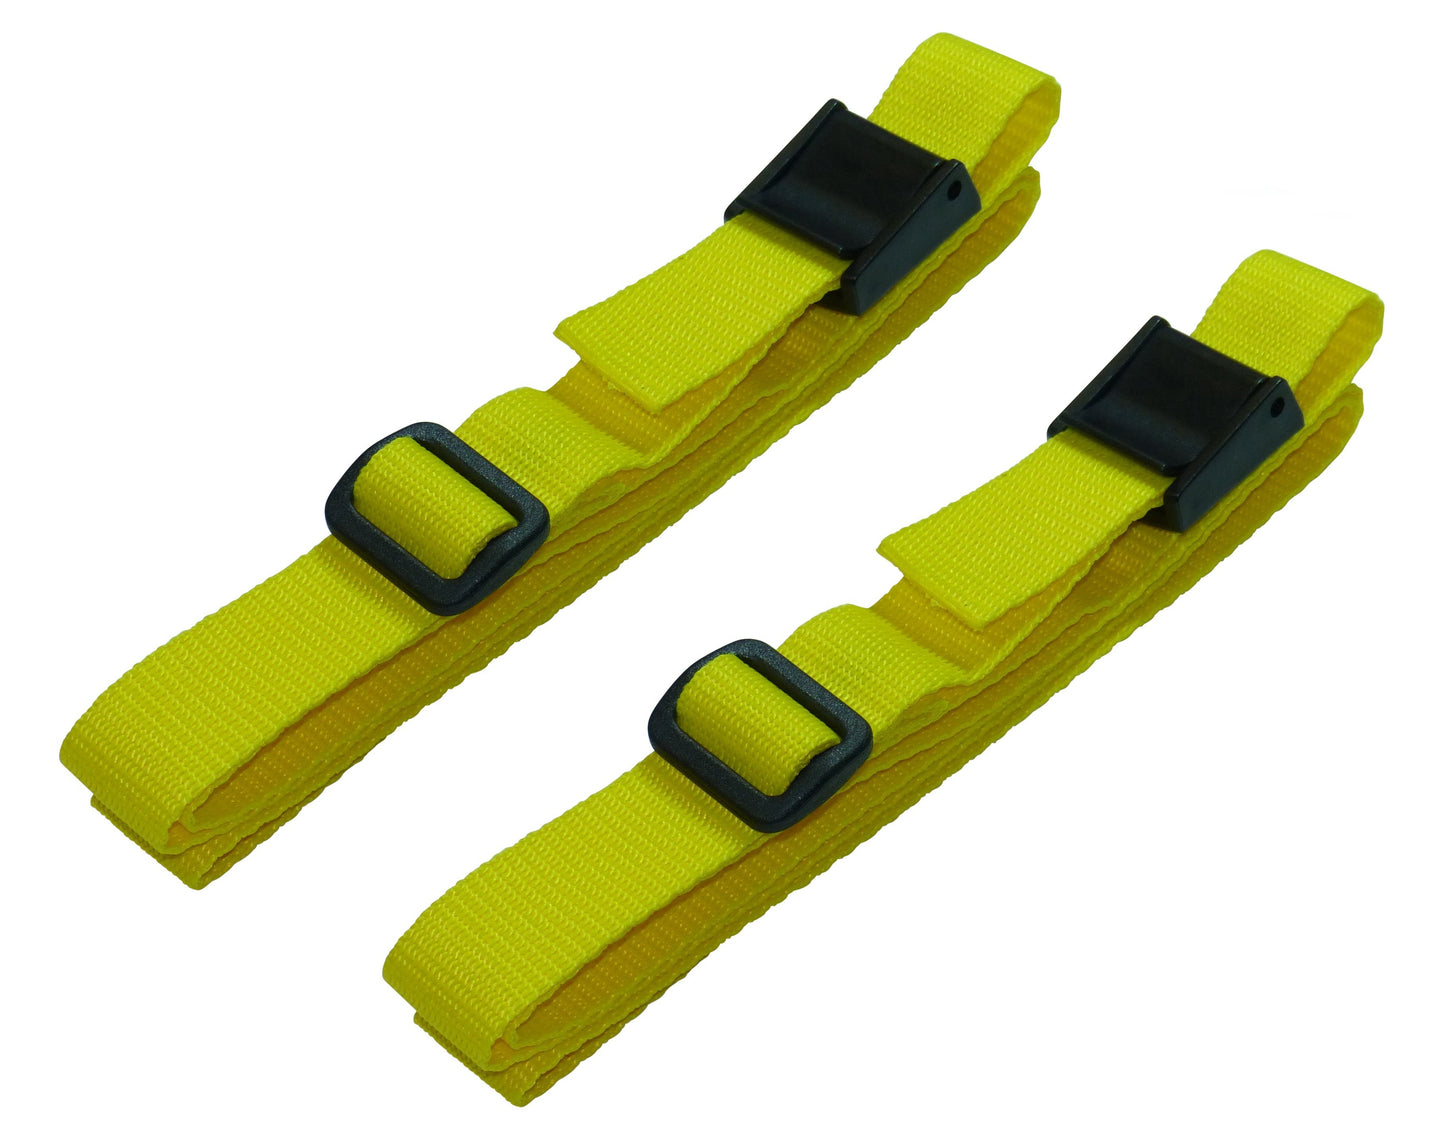 25mm Rivetted Strap with Plastic Cam Buckle & Triglide Buckles (Pair) in yellow